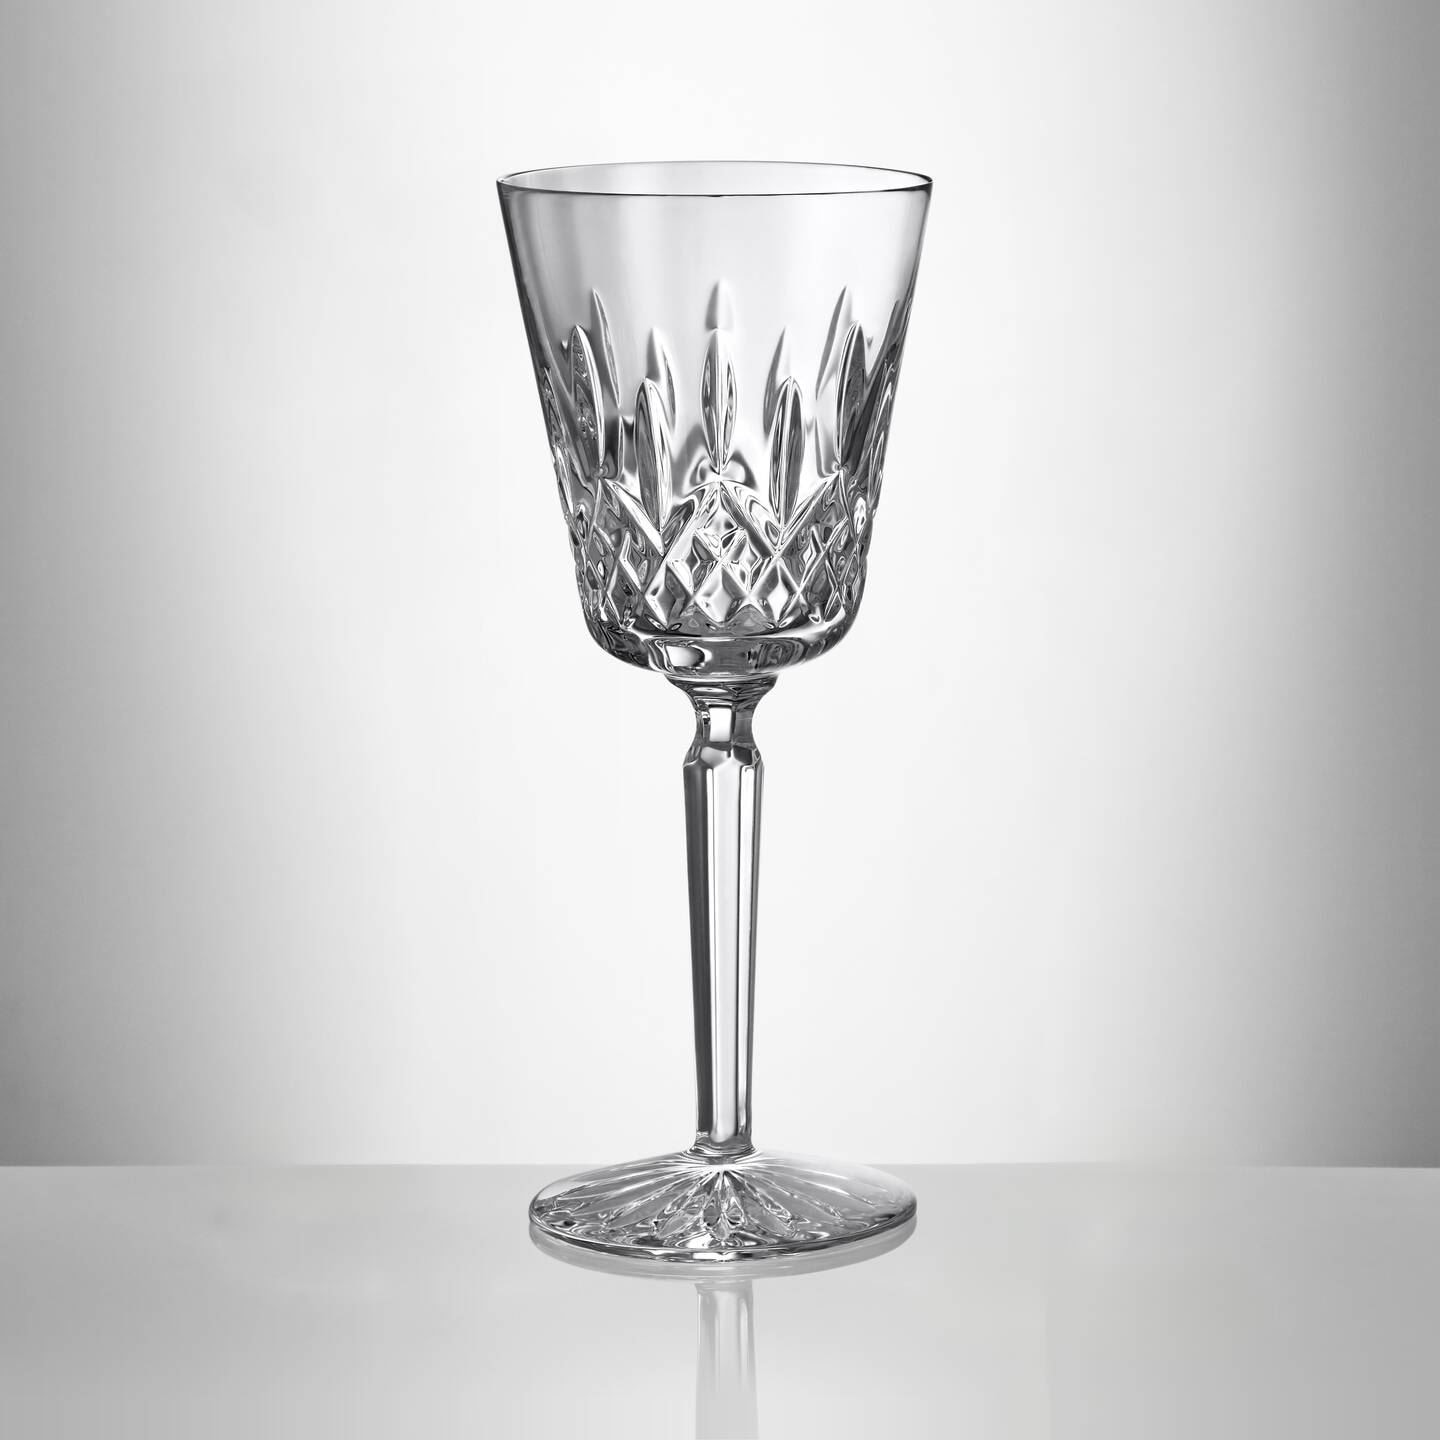 SINGLE Waterford Crystal Water Goblet or Large Wine Glass Kylemore